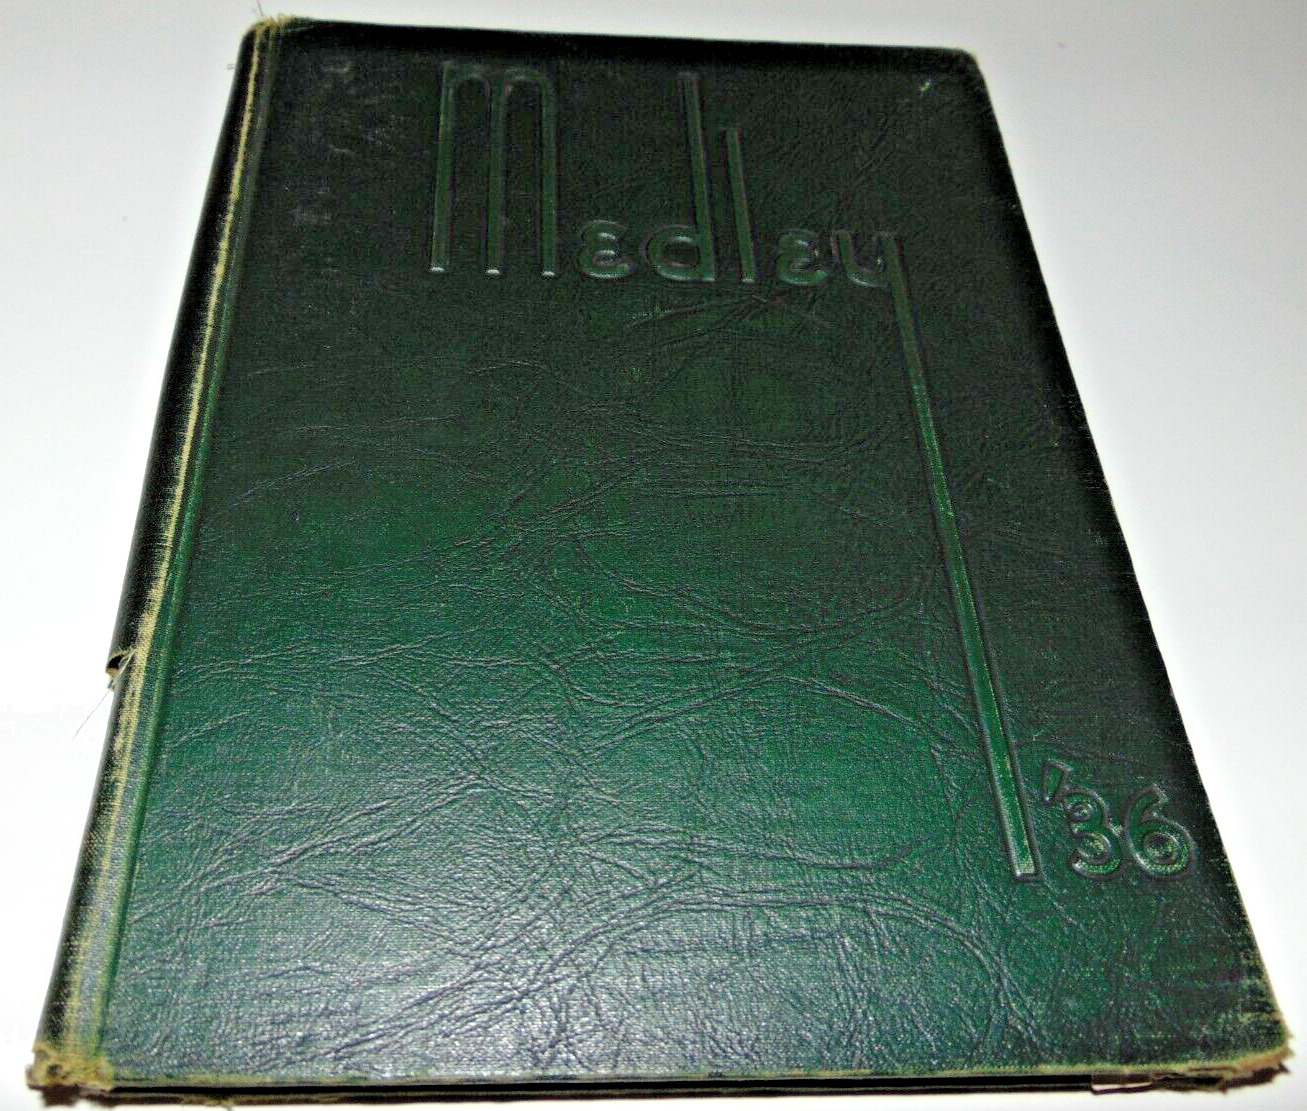 VTG 1936 High School Medley/Yearbook (Danville, IL) DHS -Rare Find